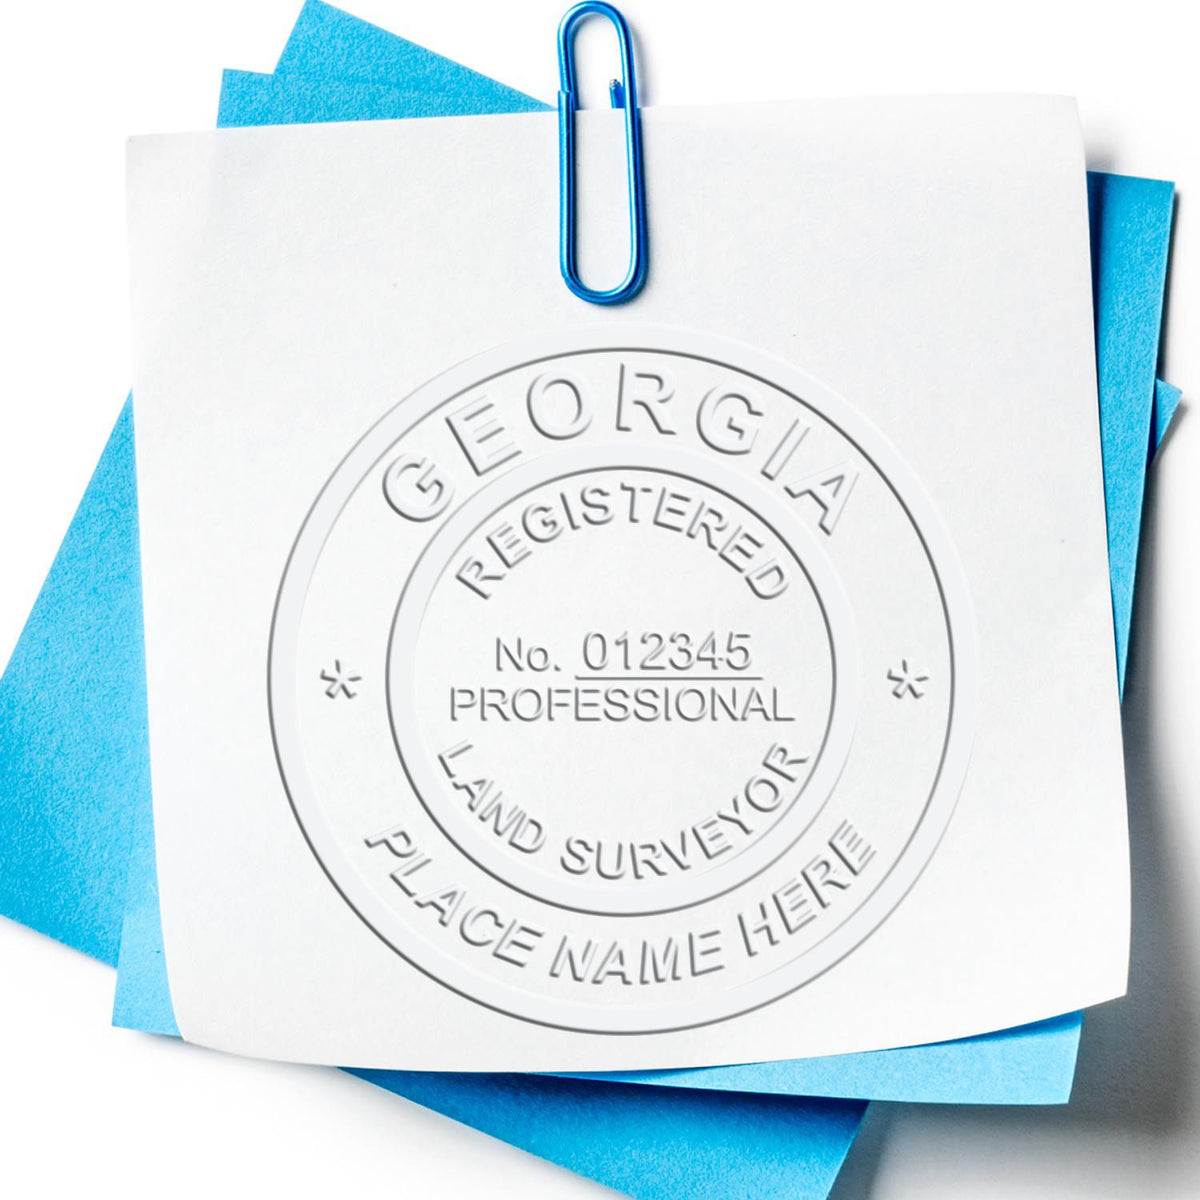 The Long Reach Georgia Land Surveyor Seal stamp impression comes to life with a crisp, detailed photo on paper - showcasing true professional quality.